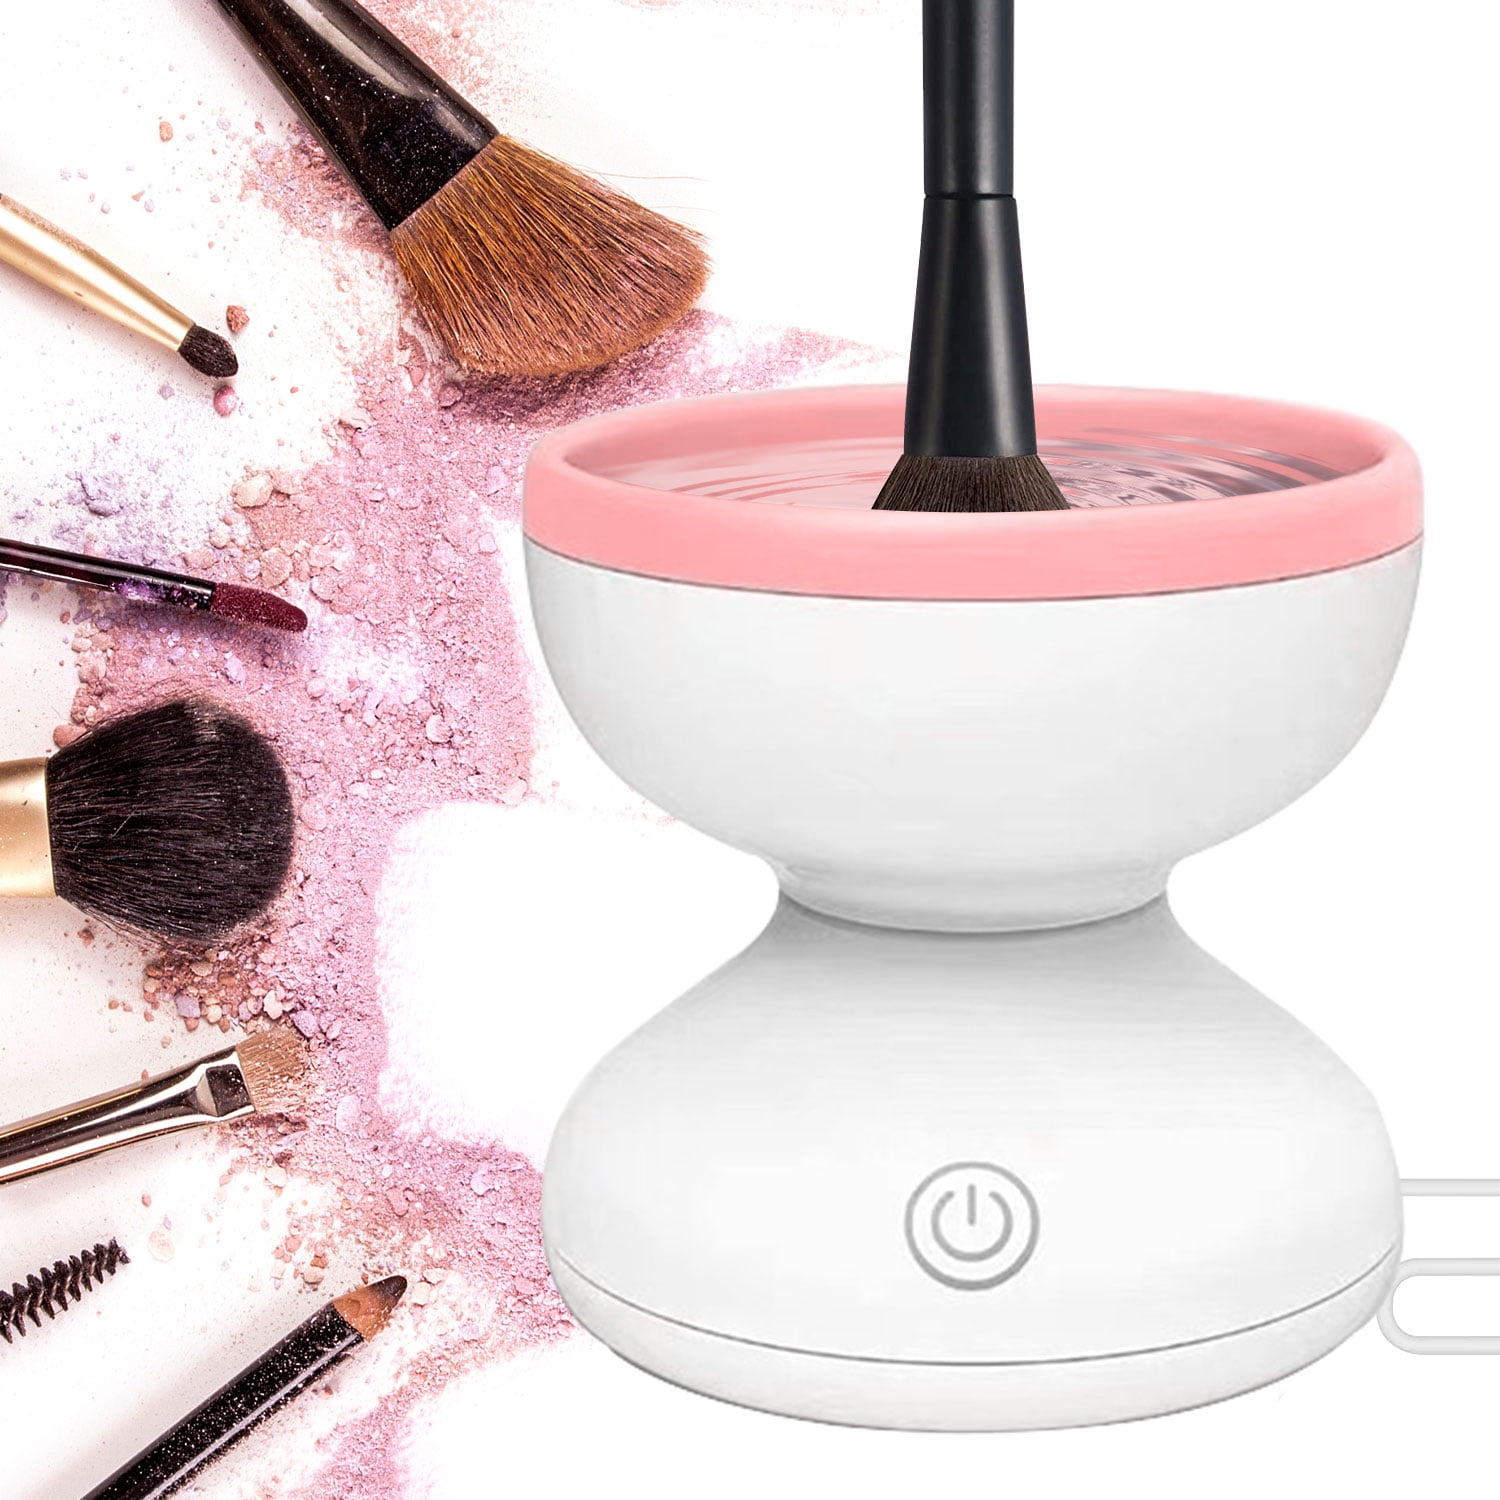 Makeup Brush Cleaner, Electric Make Up Spinning Dryer, with 8 Sizes of  Rubber Collars, Super-Fast Automatic Spinner Machine, Battery Operated,  Pink - Wecolor